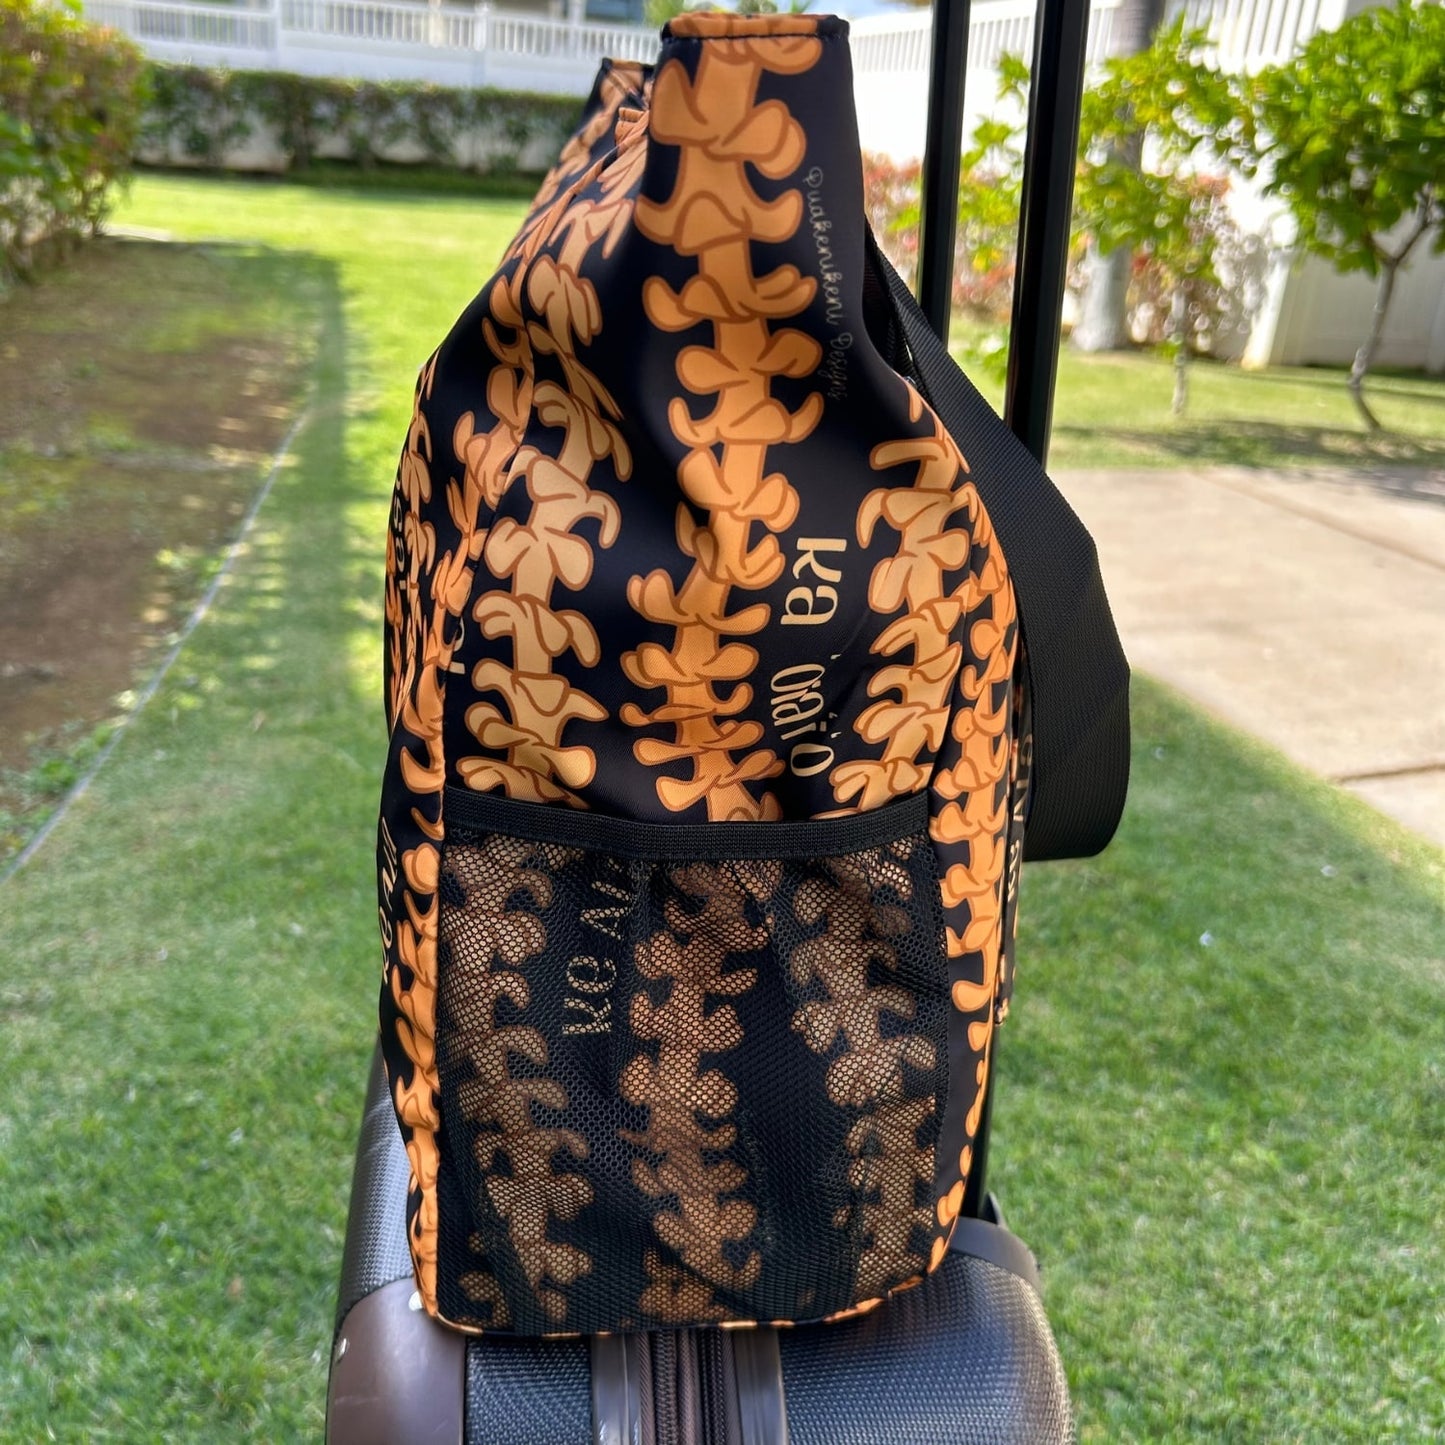 Holoholo Bag for travel, beach, hula, with puakenikeni lei Christian Faith collection by Puakenikeni Designs on a rolling suitcase side view